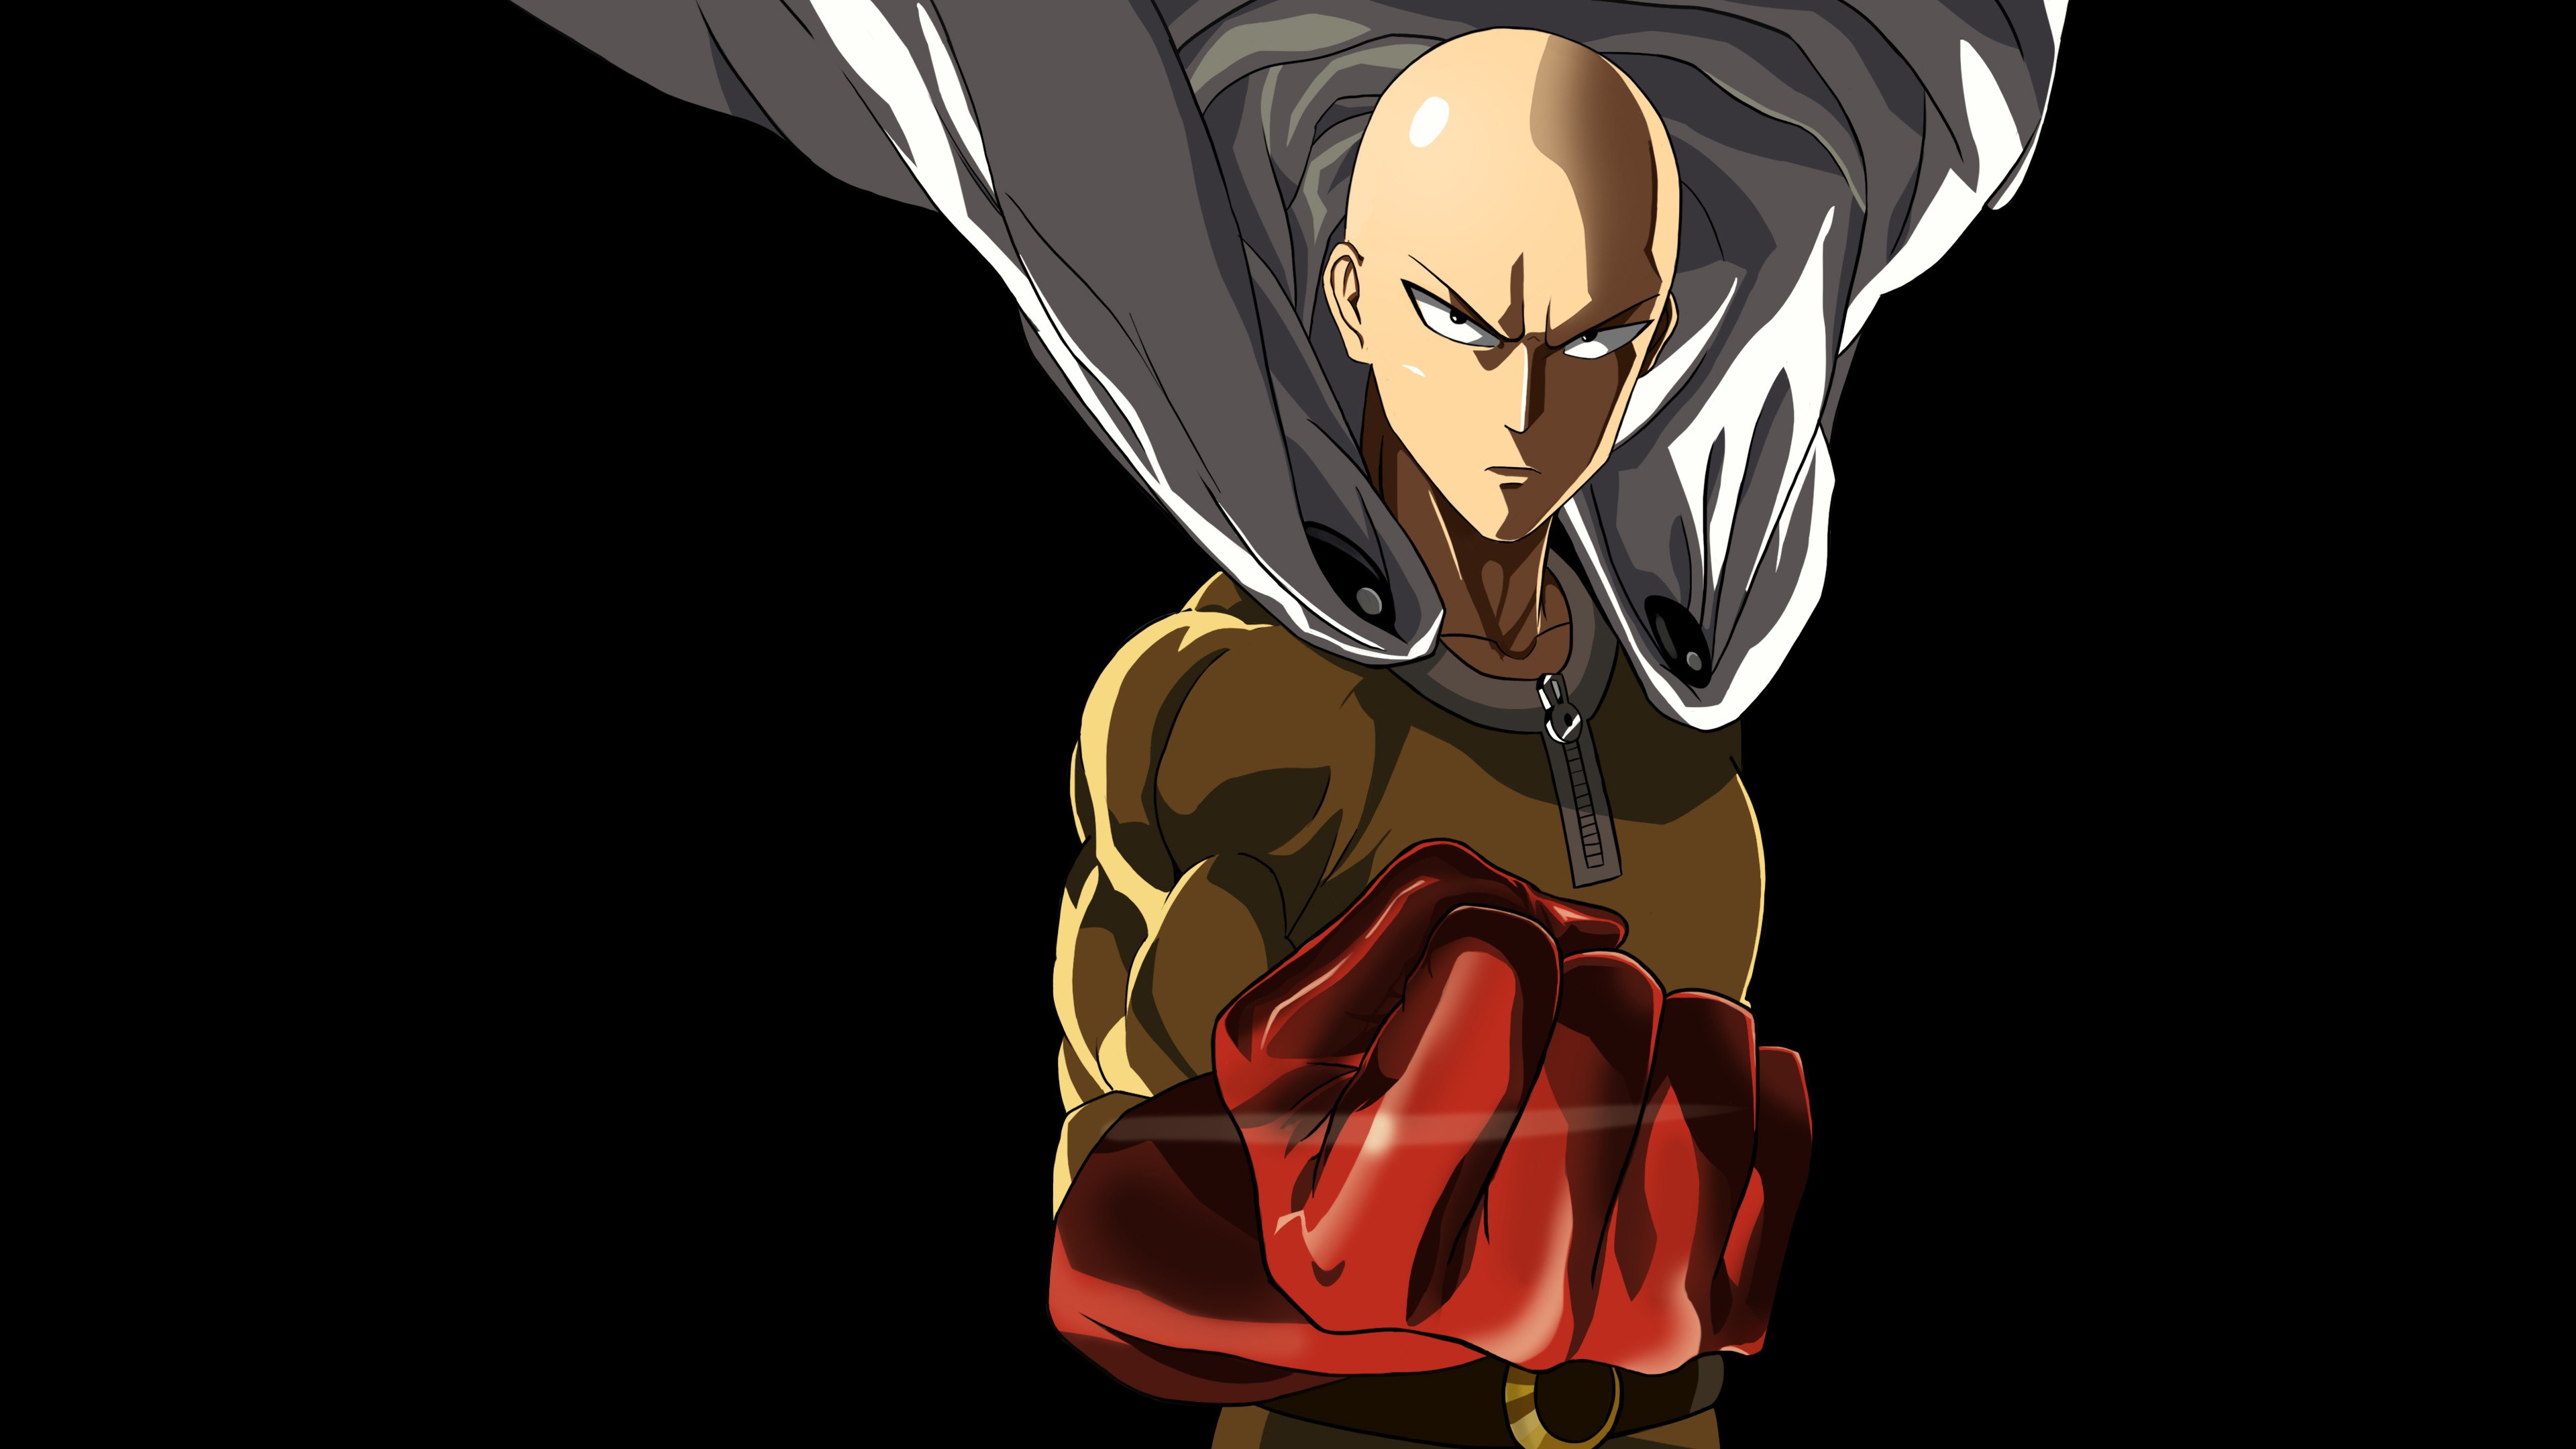 3. "Saitama" from One Punch Man - wide 2